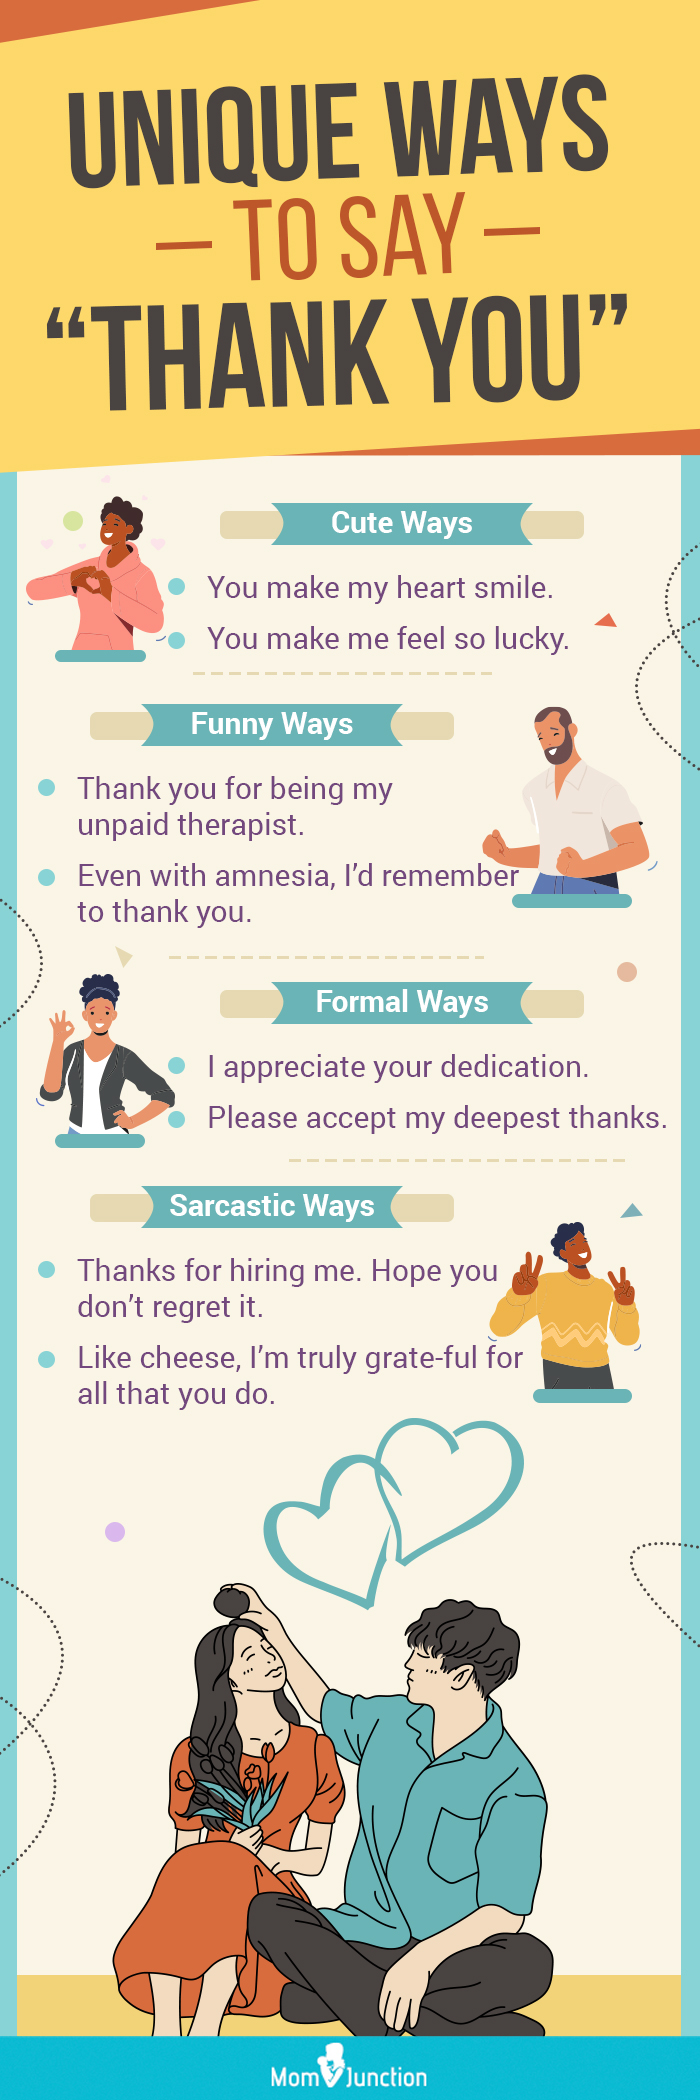 unique ways to say thank you (infographic) 